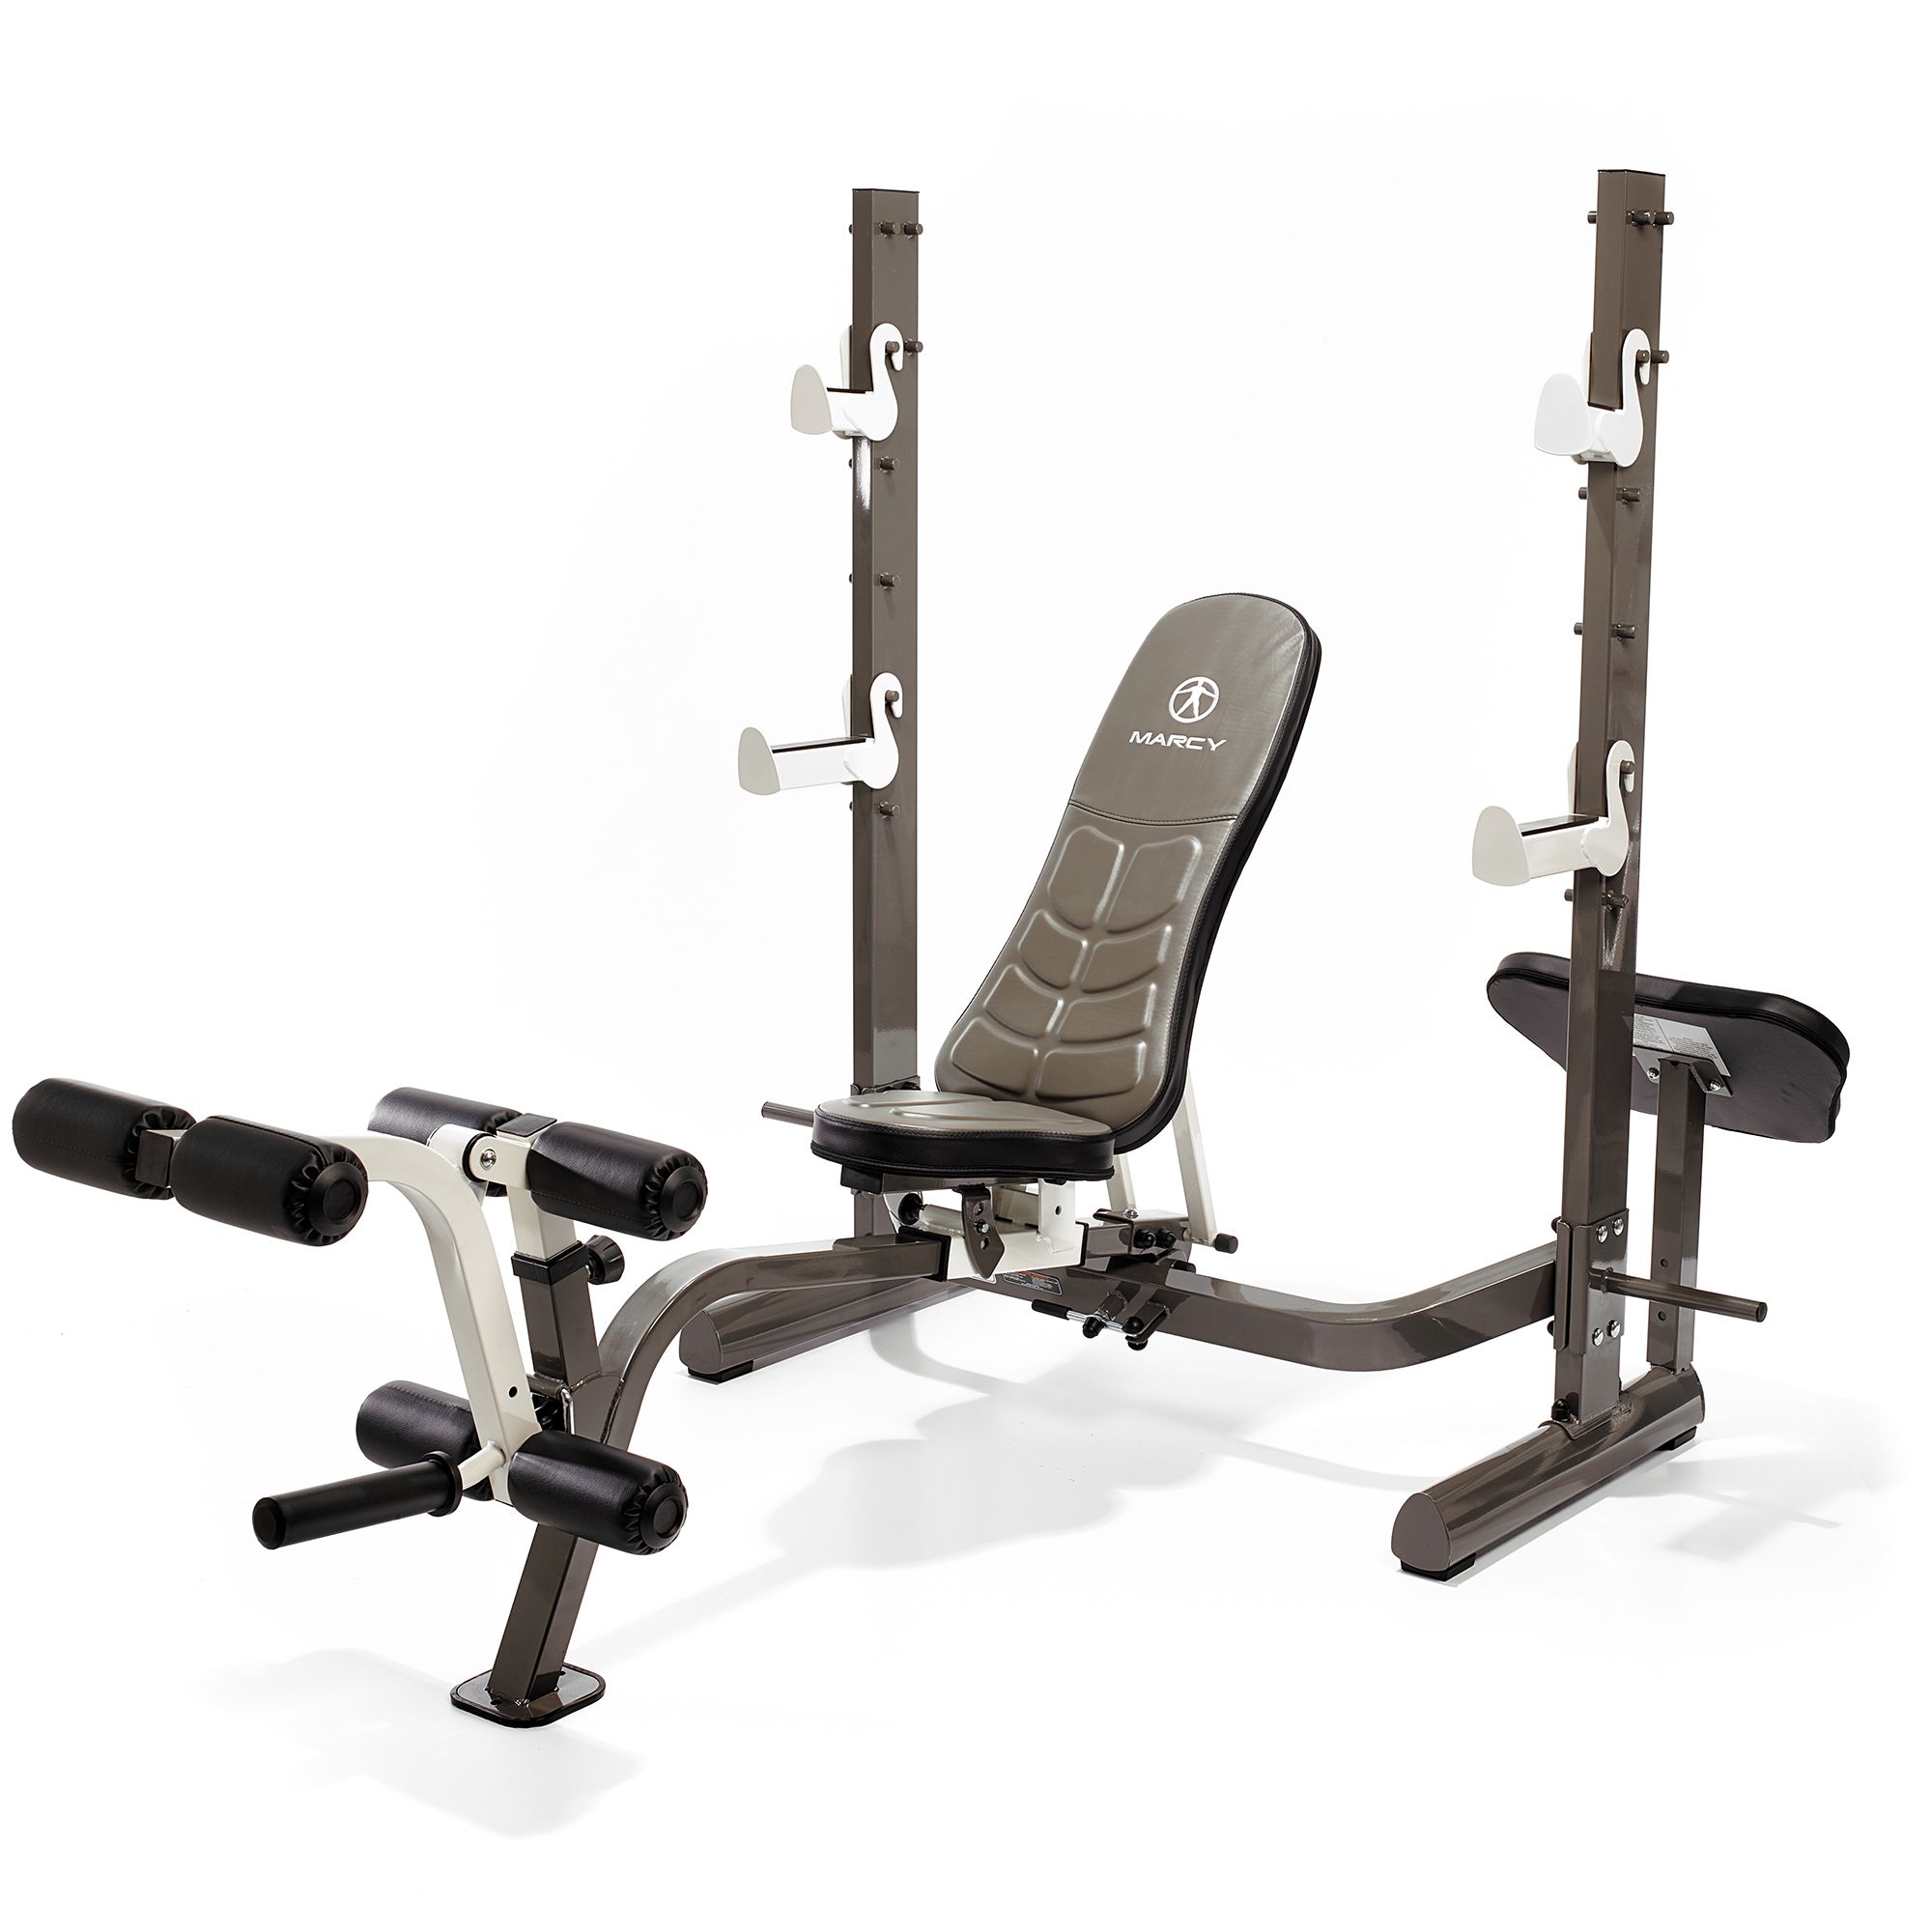 Photos - Weight Bench Marcy MWB-70205 Folding Olympic Bench with Rear Squat Rack 